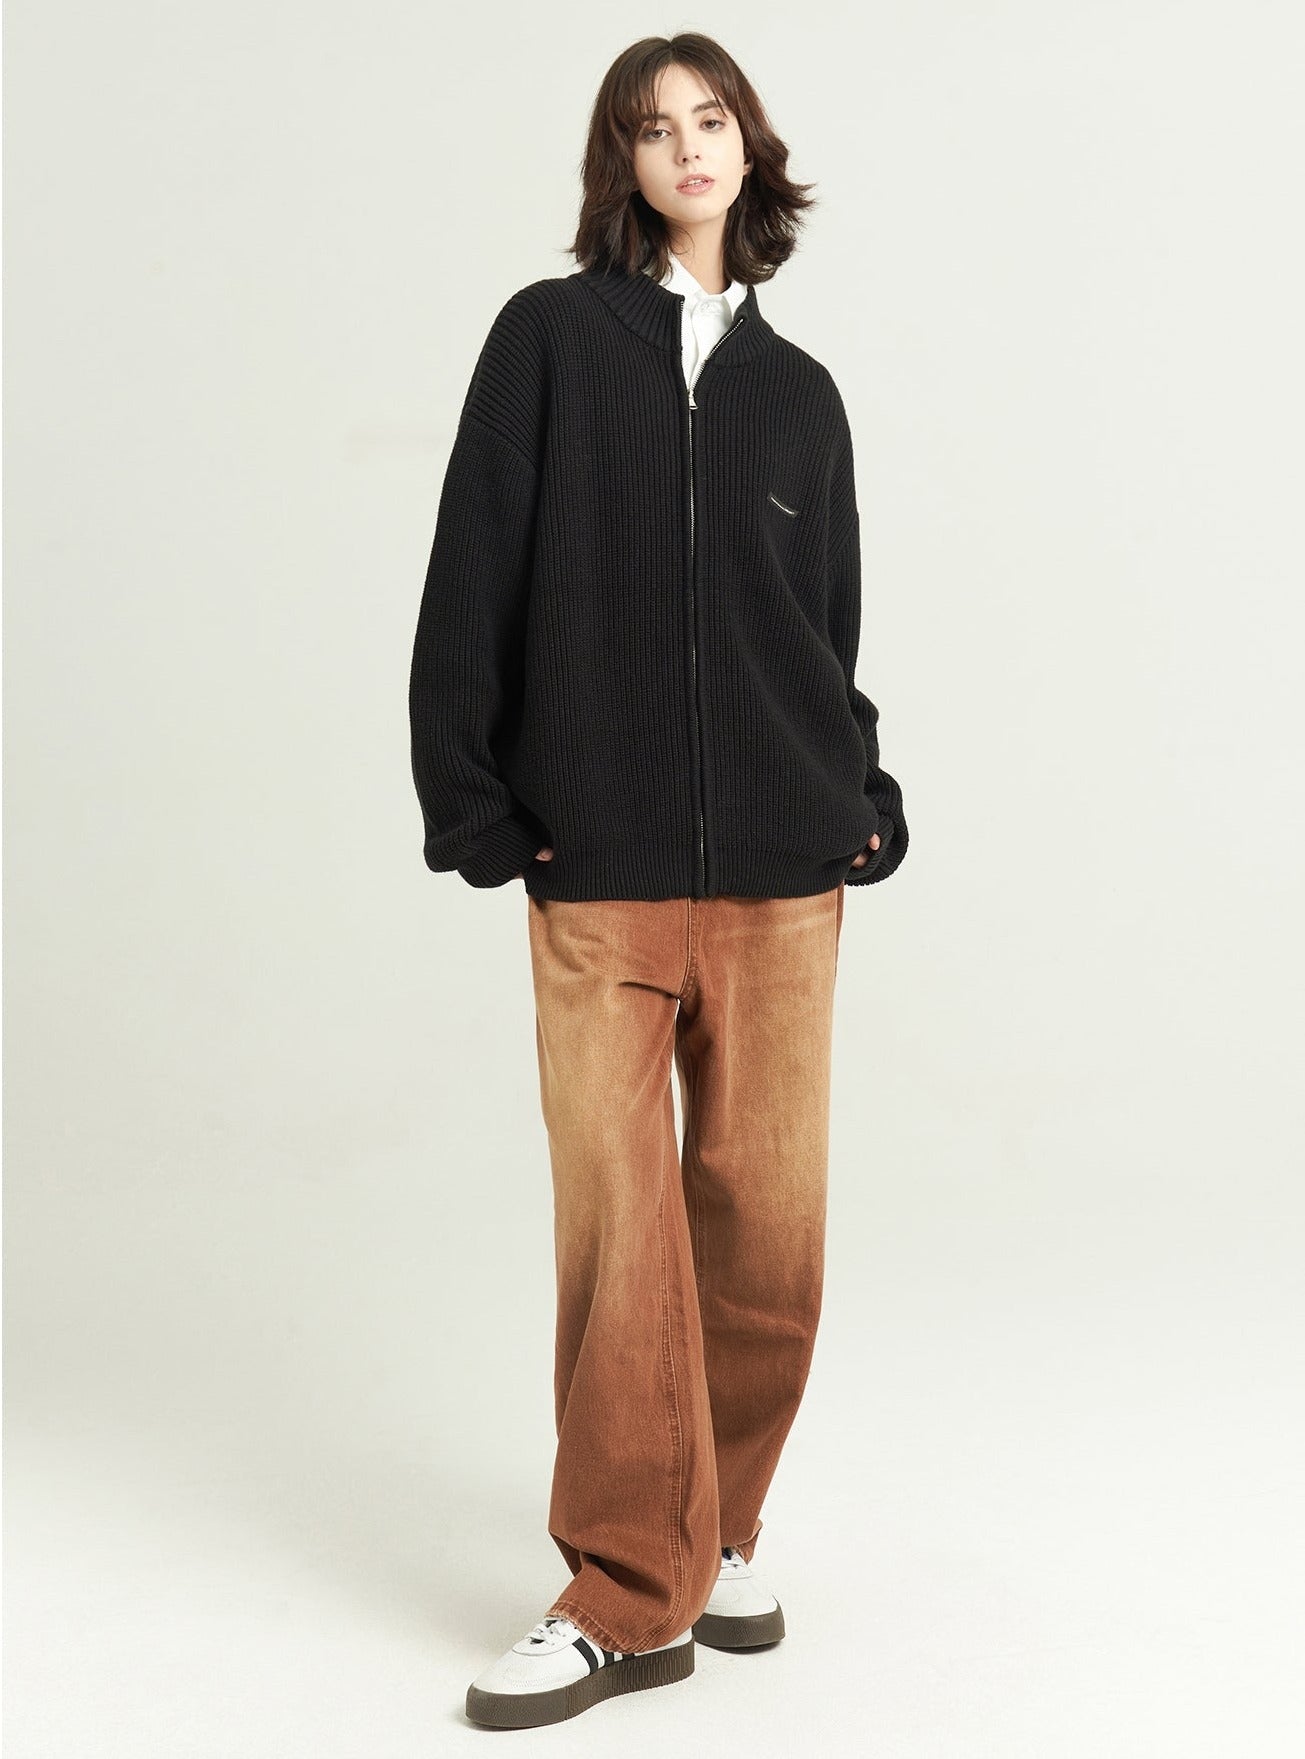 Tide plain basic stand-up collar sweater